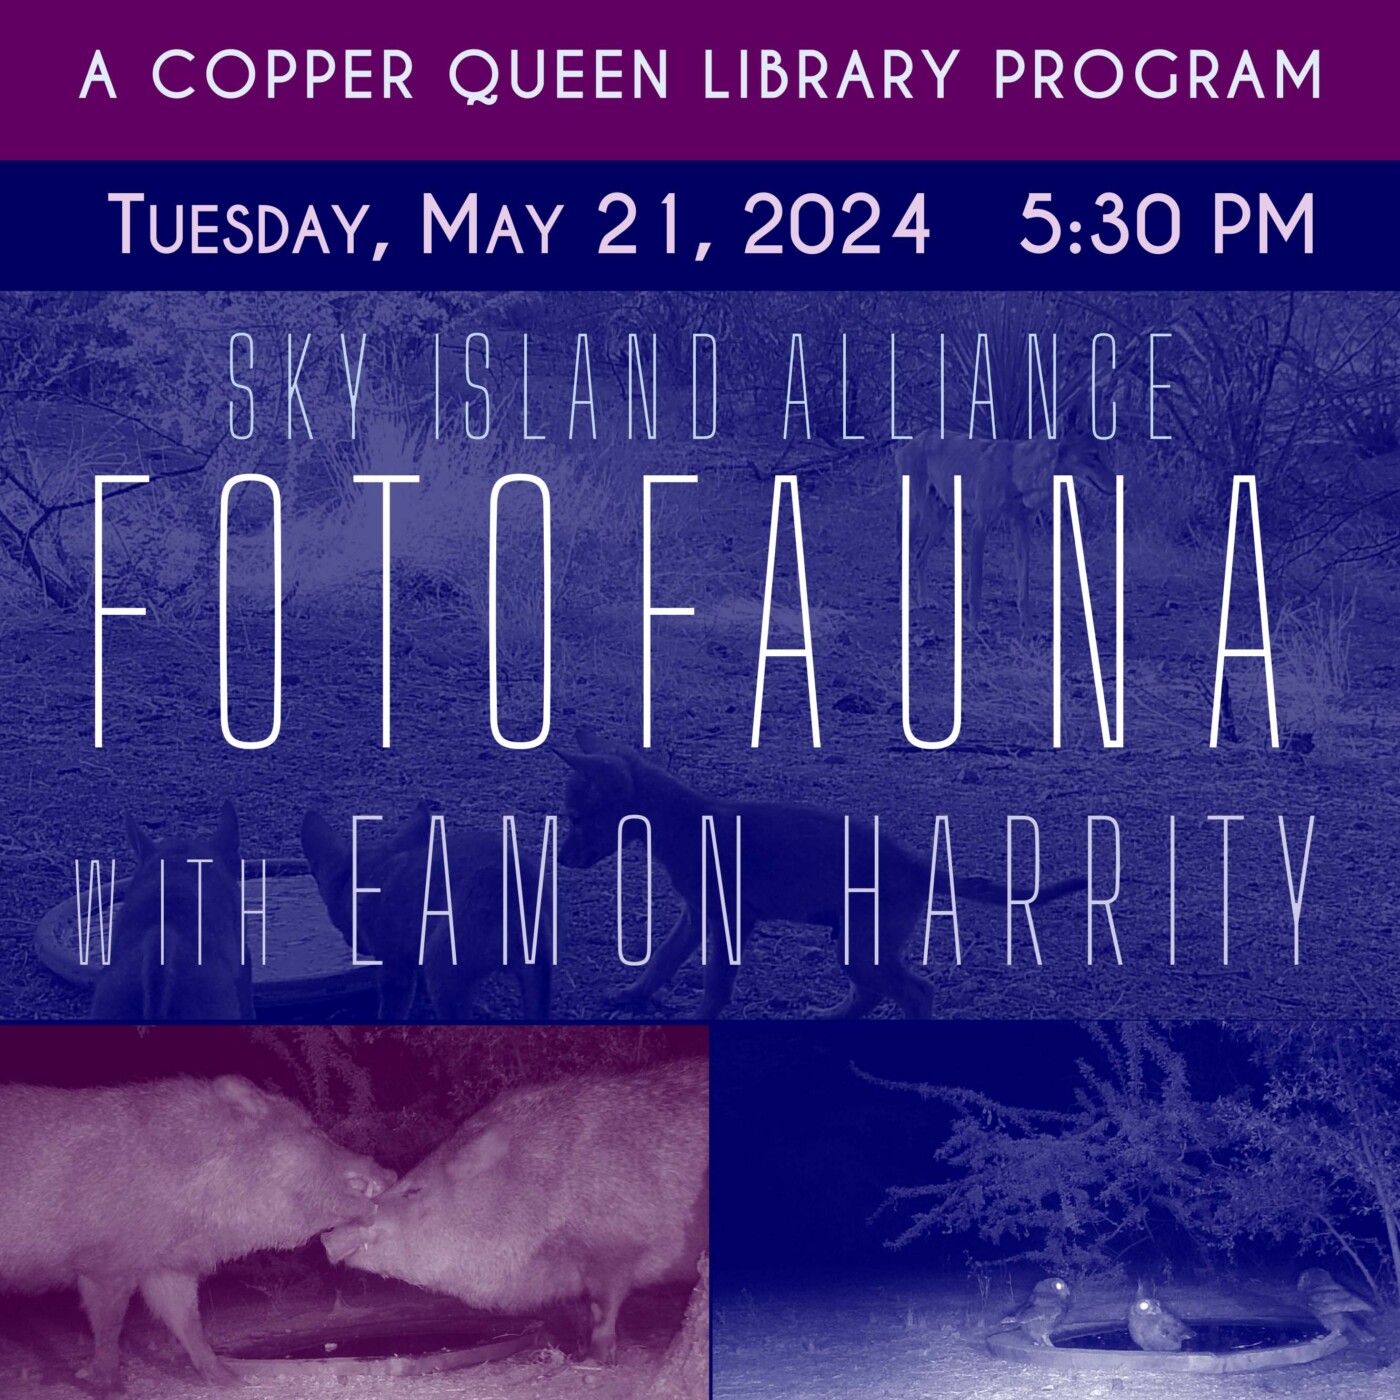 The image for FotoFauna Lending Library Kickoff in Bisbee